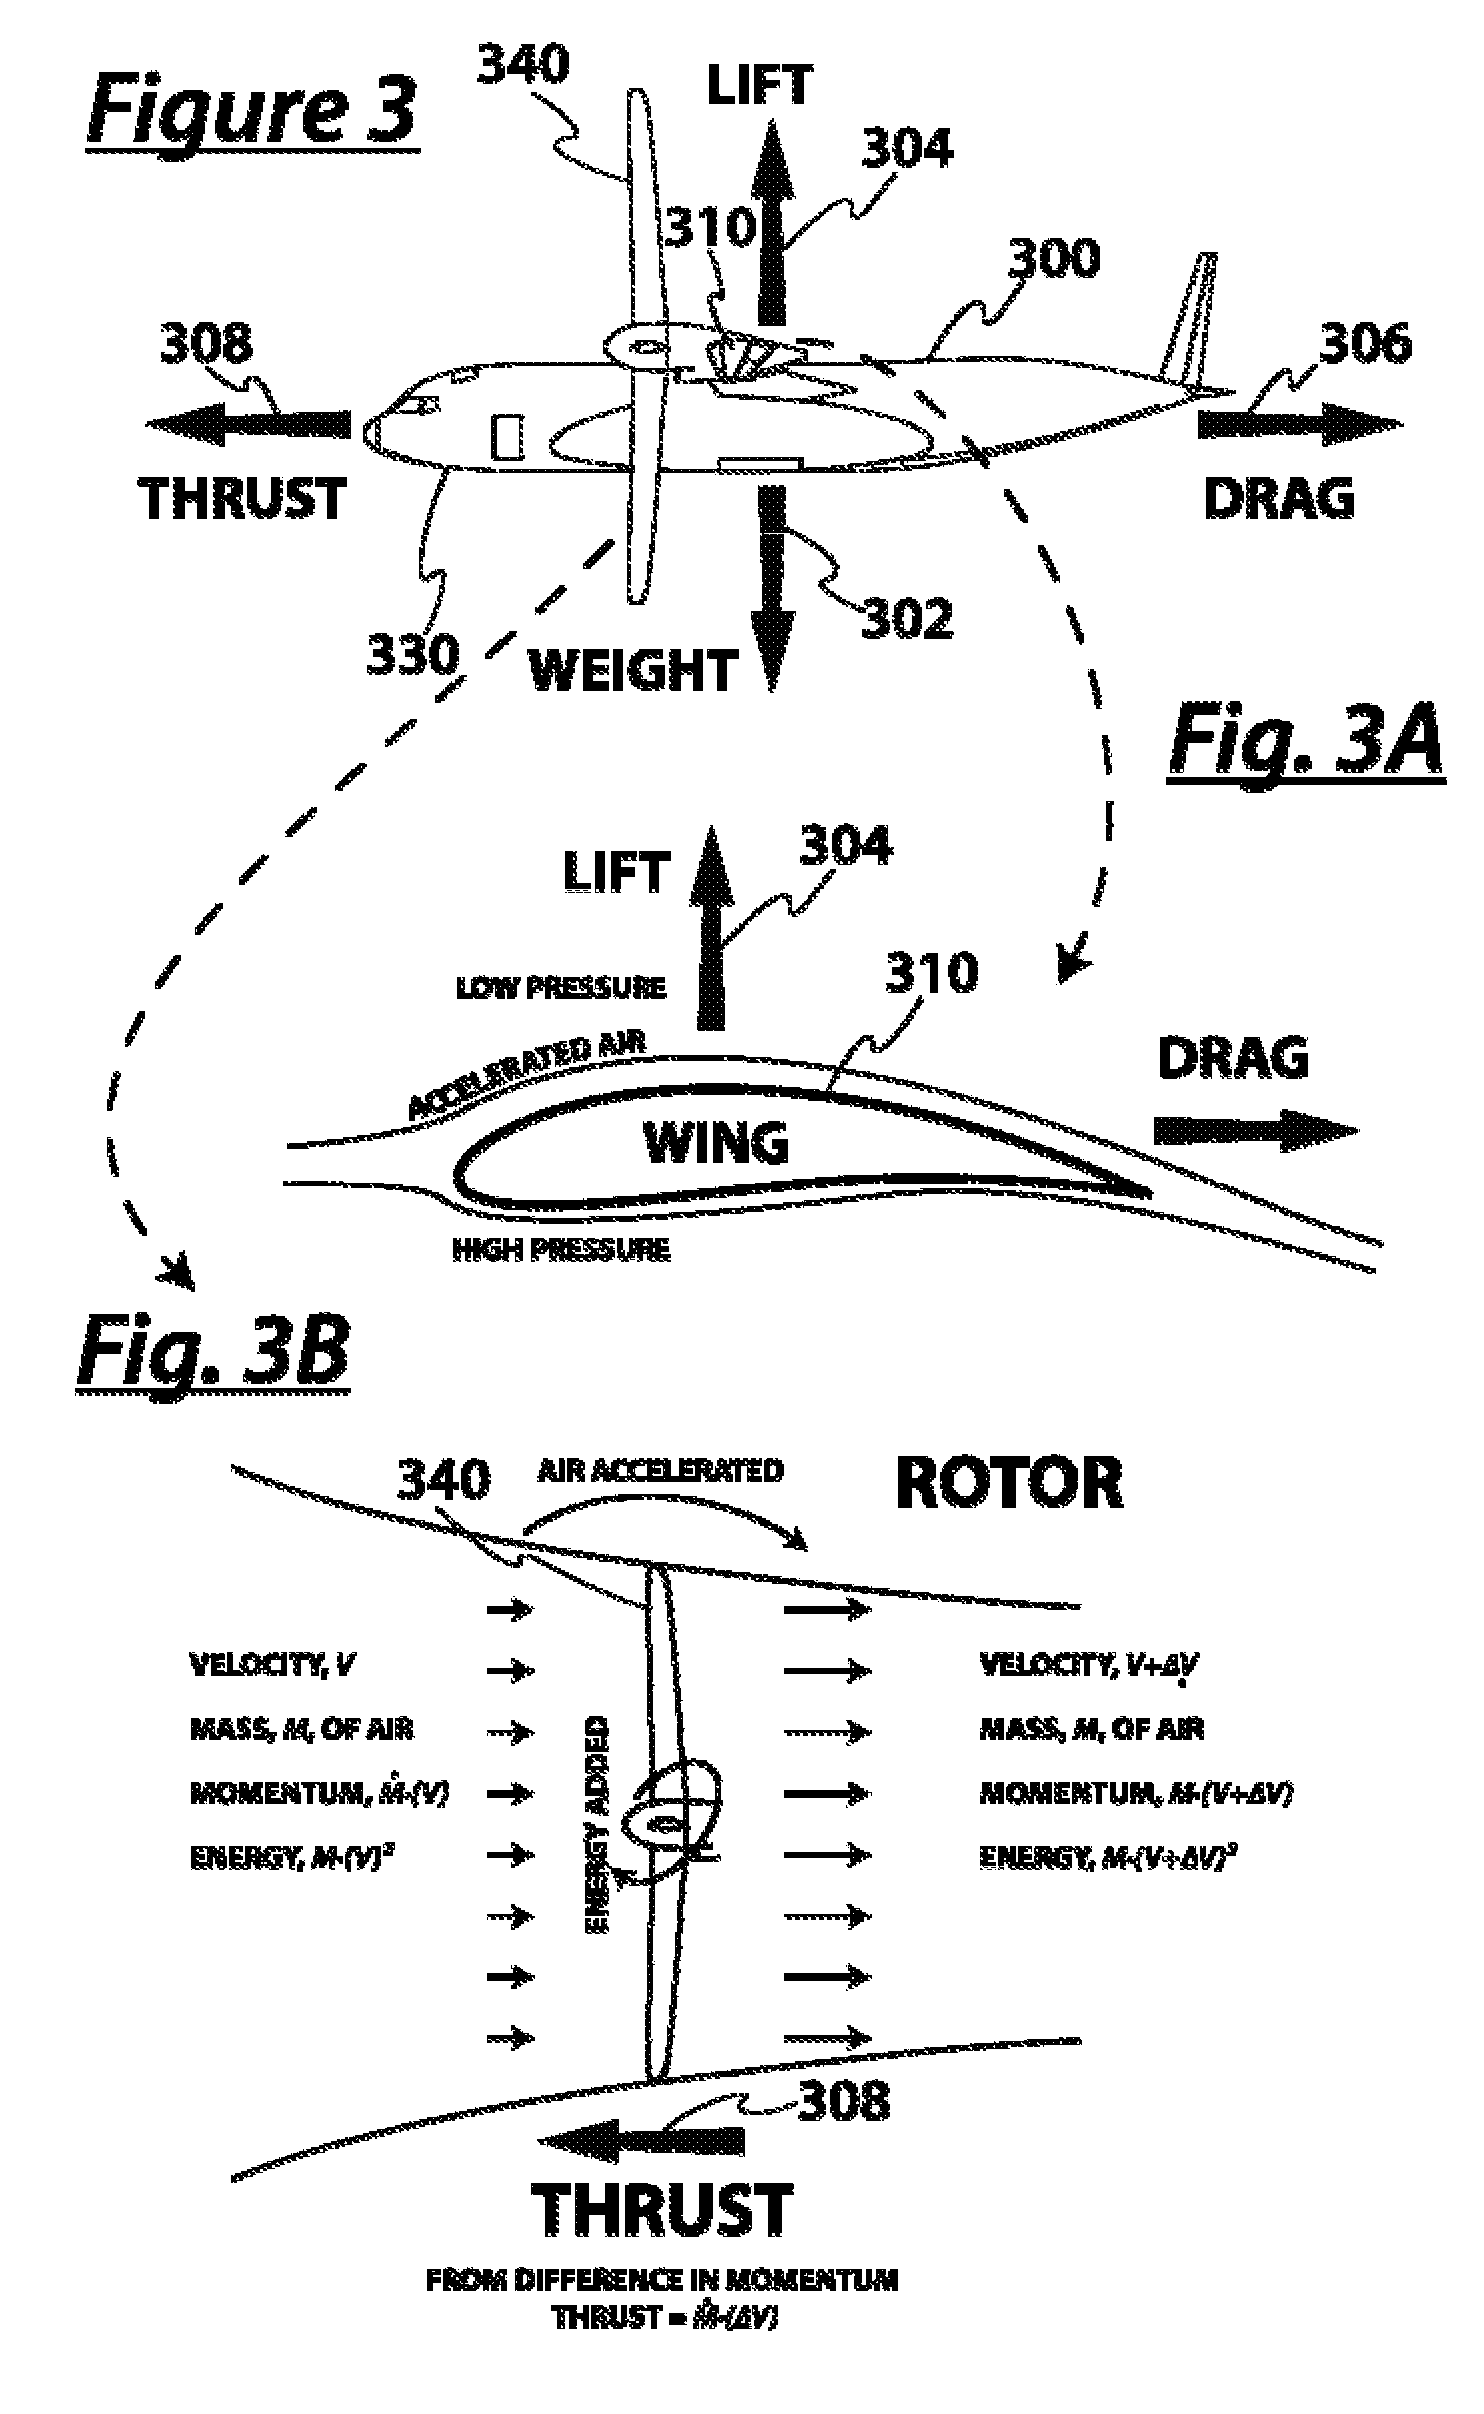 Aircraft with Integrated Lift and Propulsion System